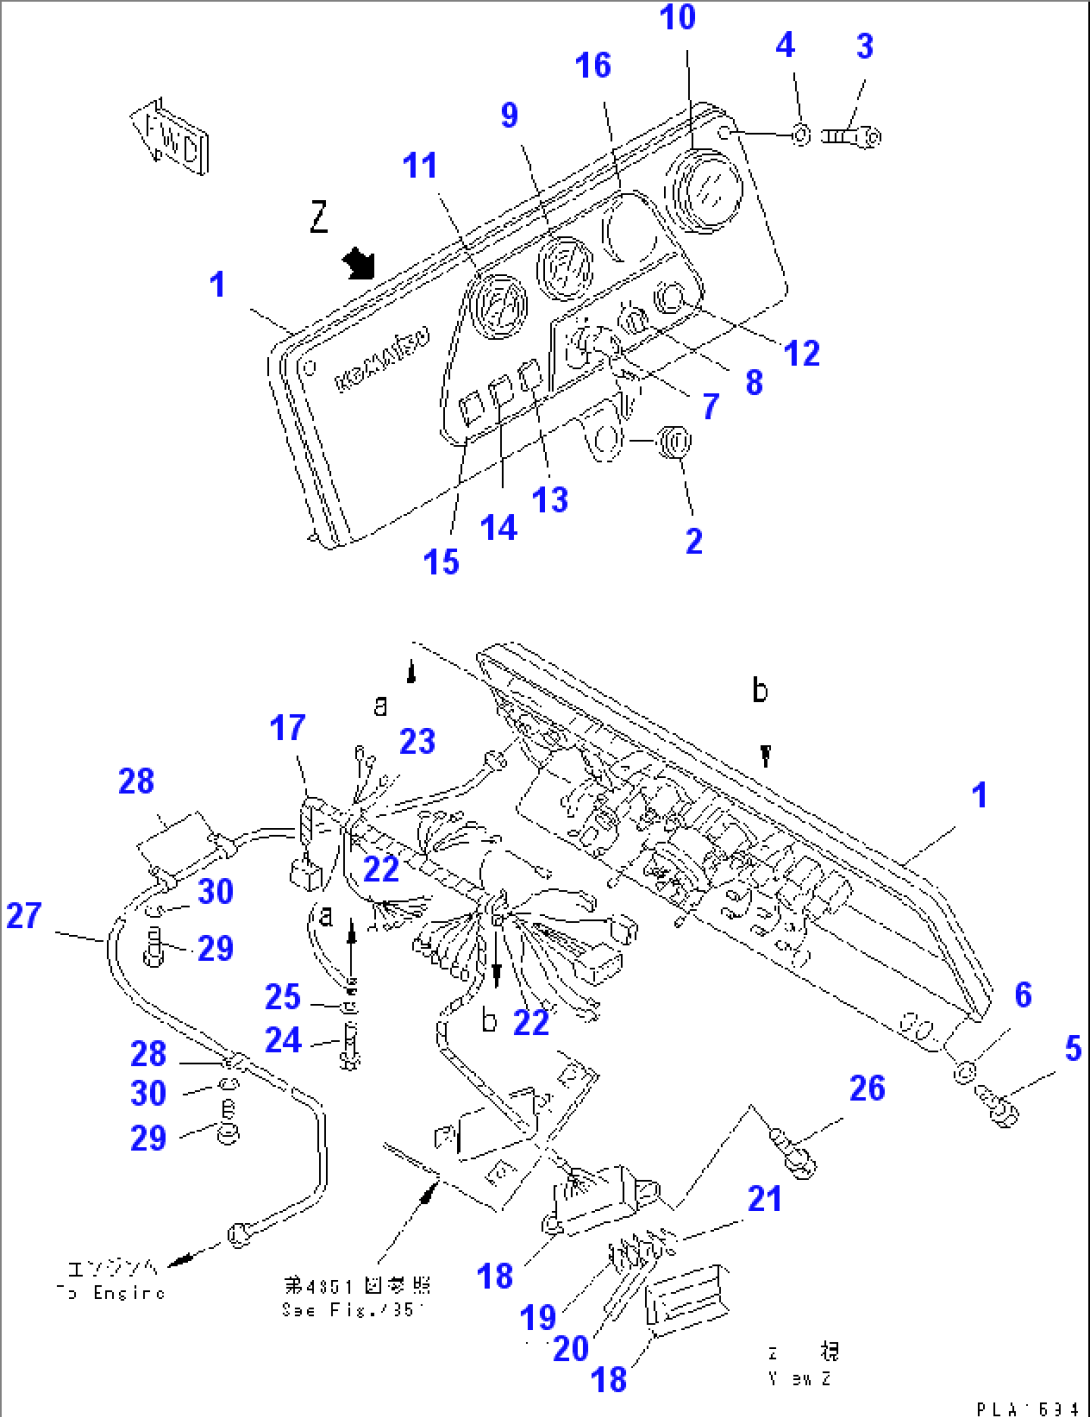 INSTRUMENT PANEL (FOR MONO LEVER STEERING) (WITH TACHOMETER)